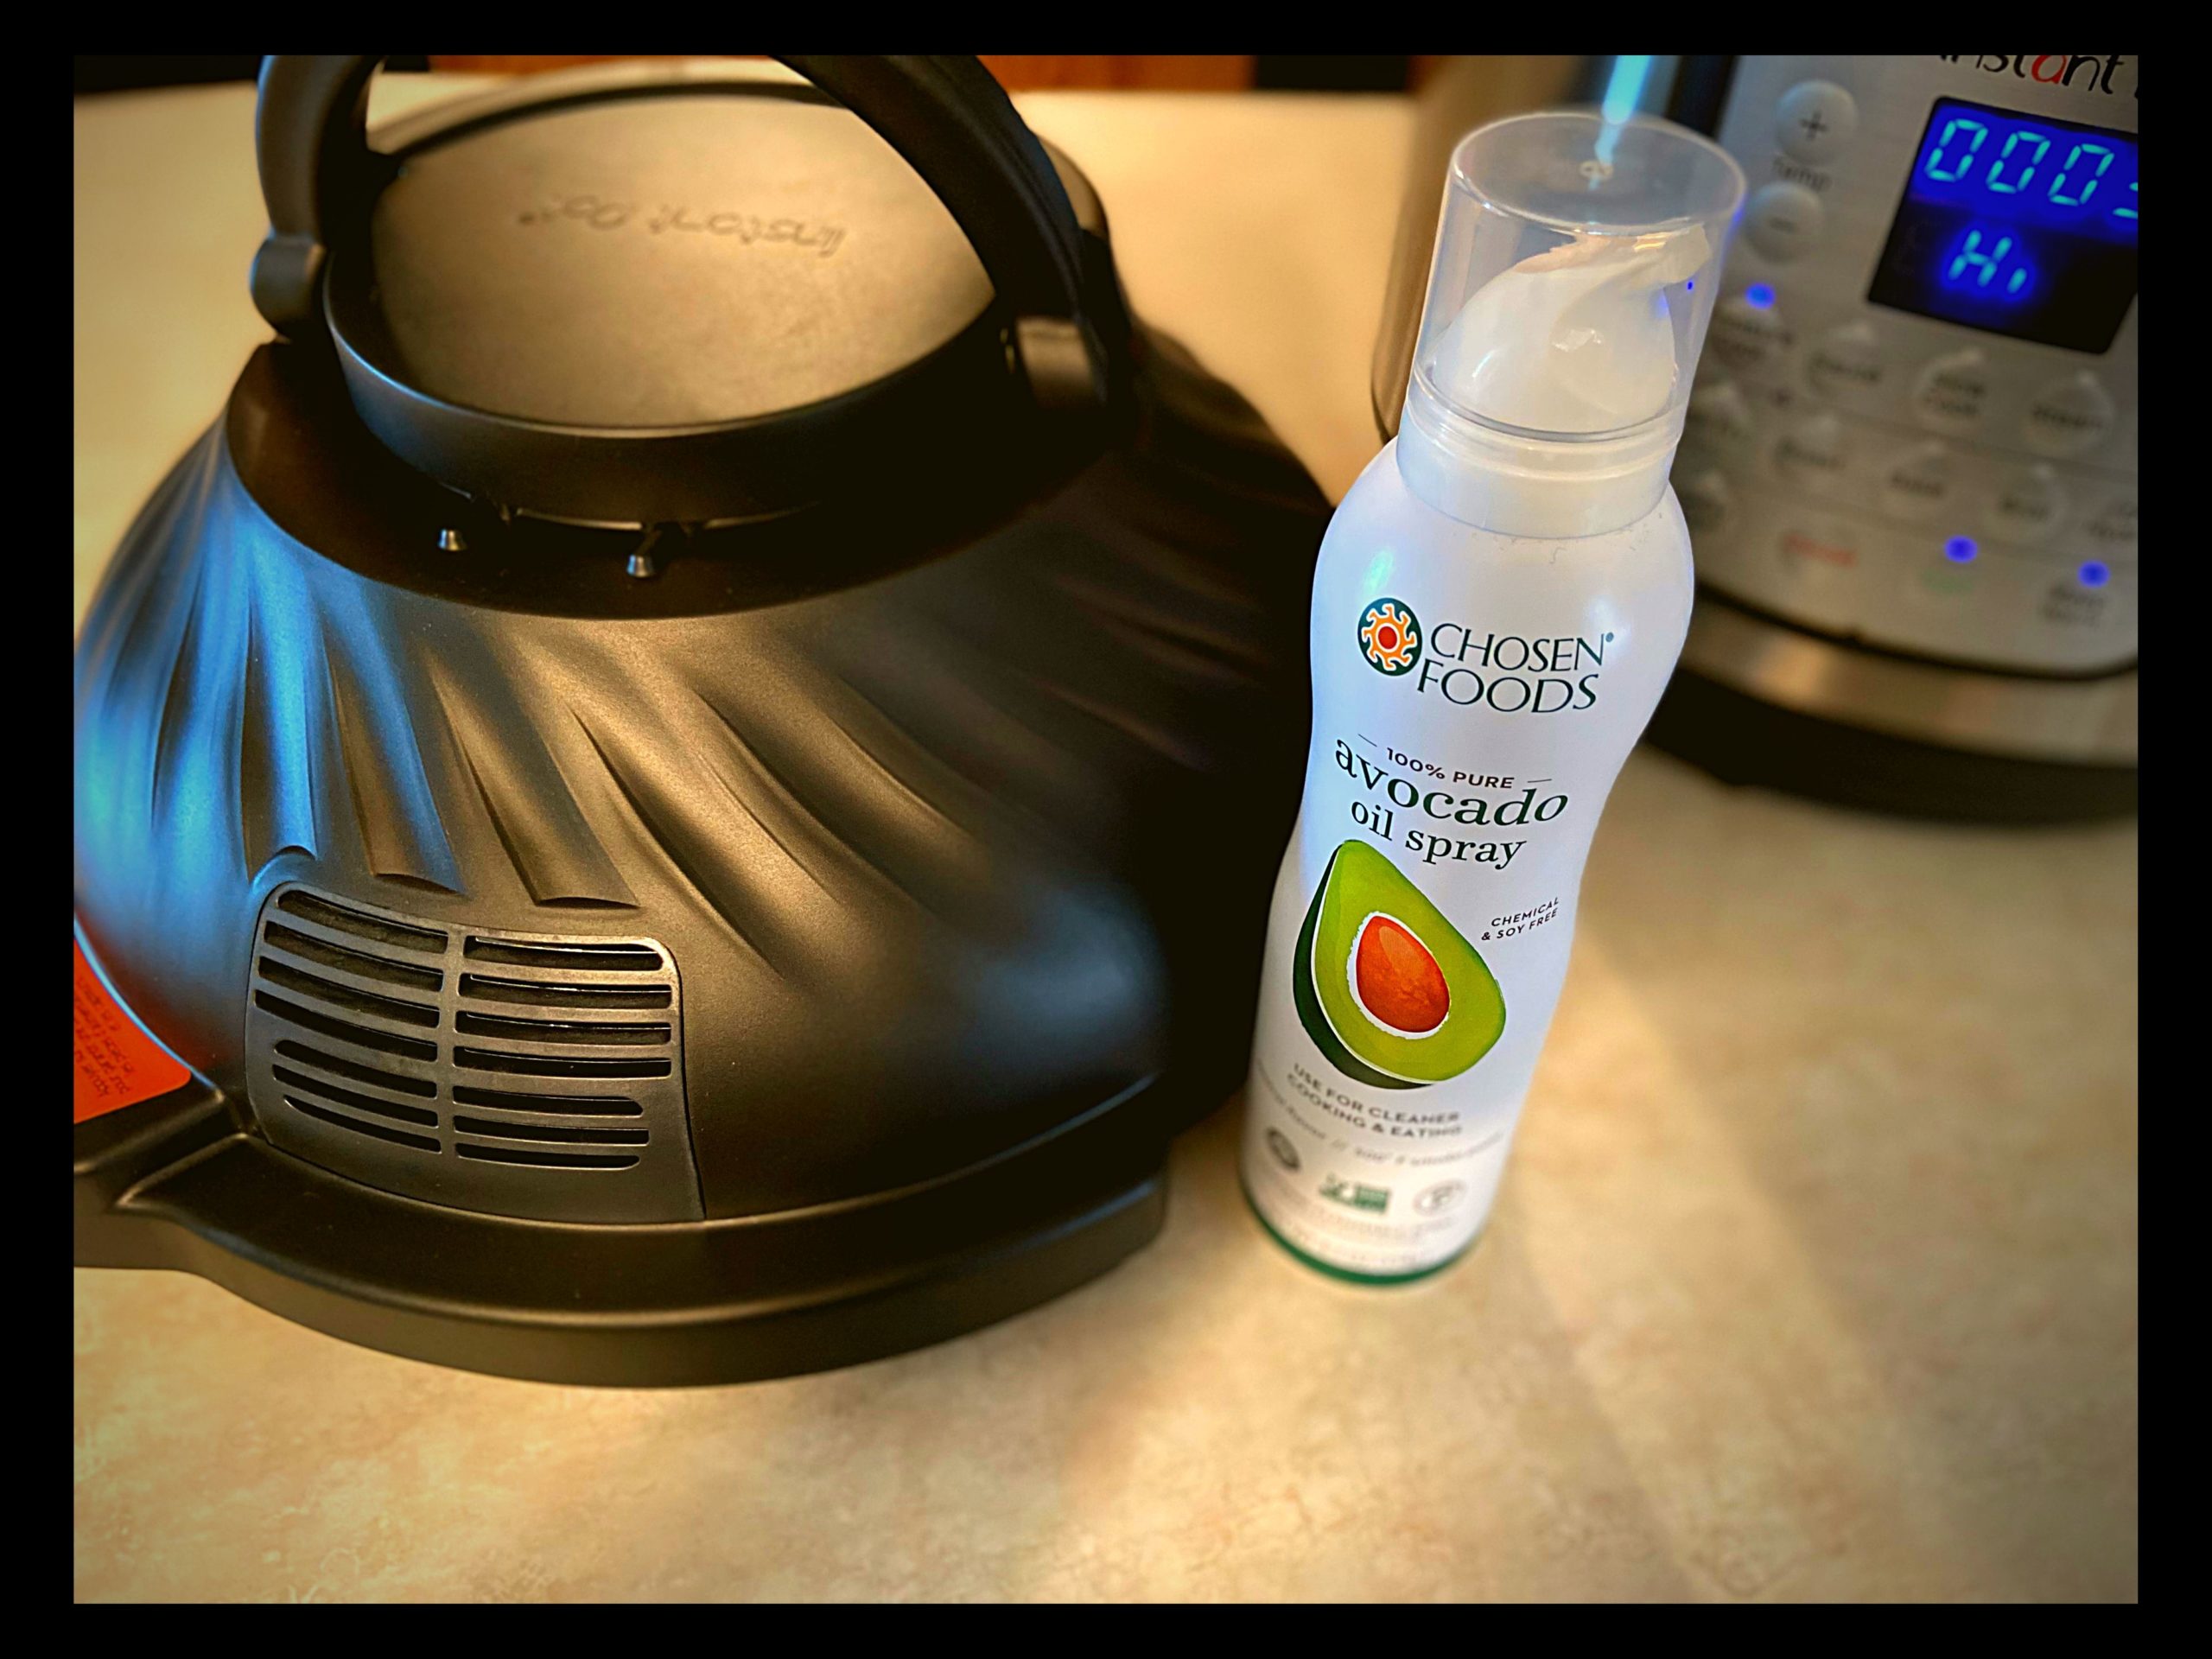 An Instant Pot Duo Crisp plus air fryer and a bottle of Avocado oil spray sitting on a kitchen counter top.